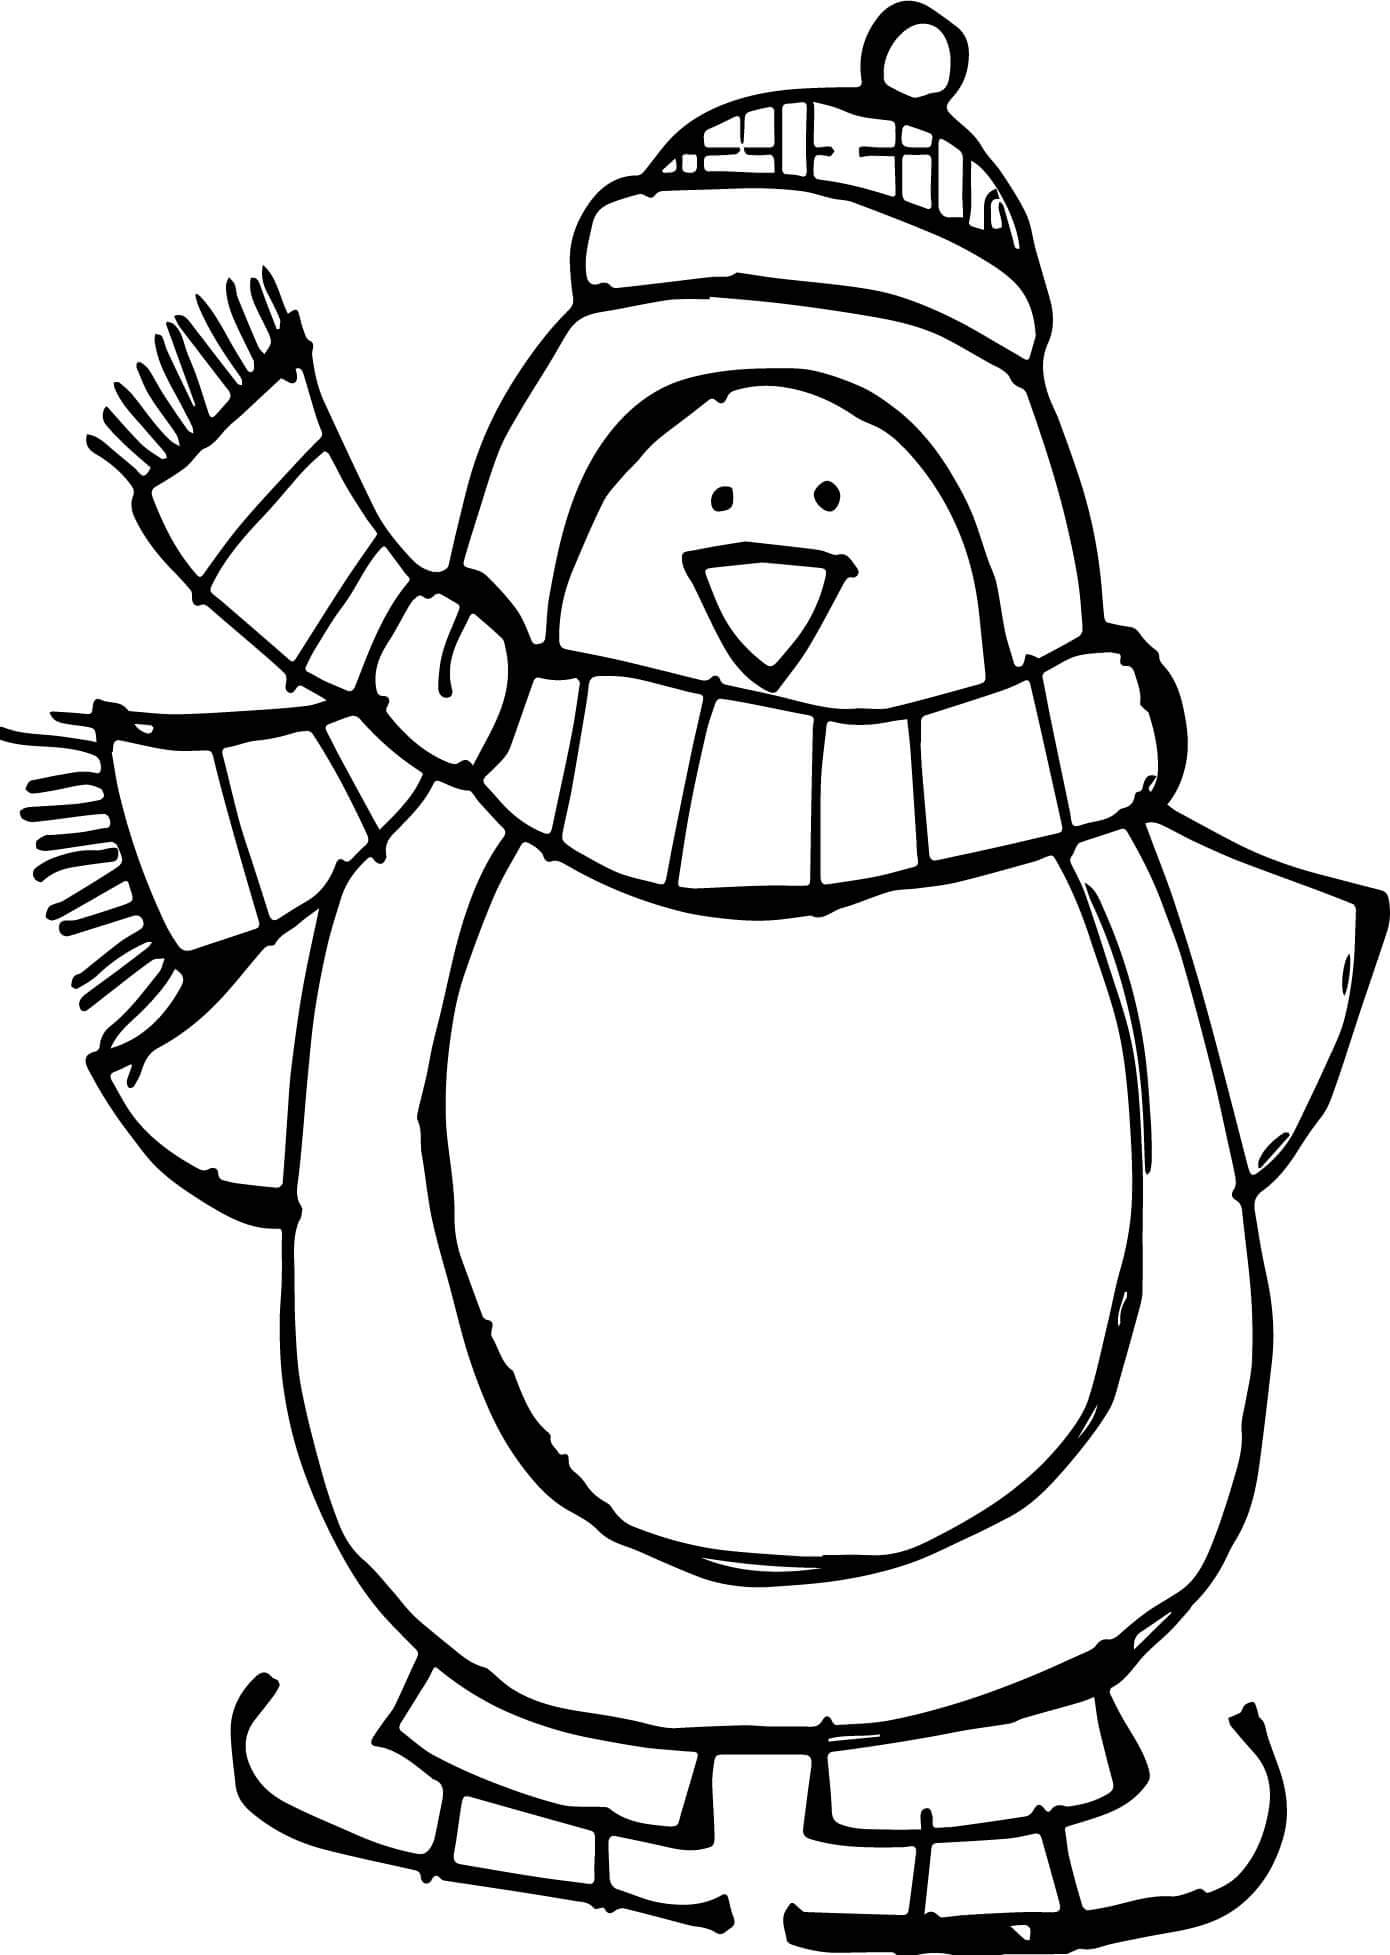 Cute Ice Skating Penguin Coloring Pages